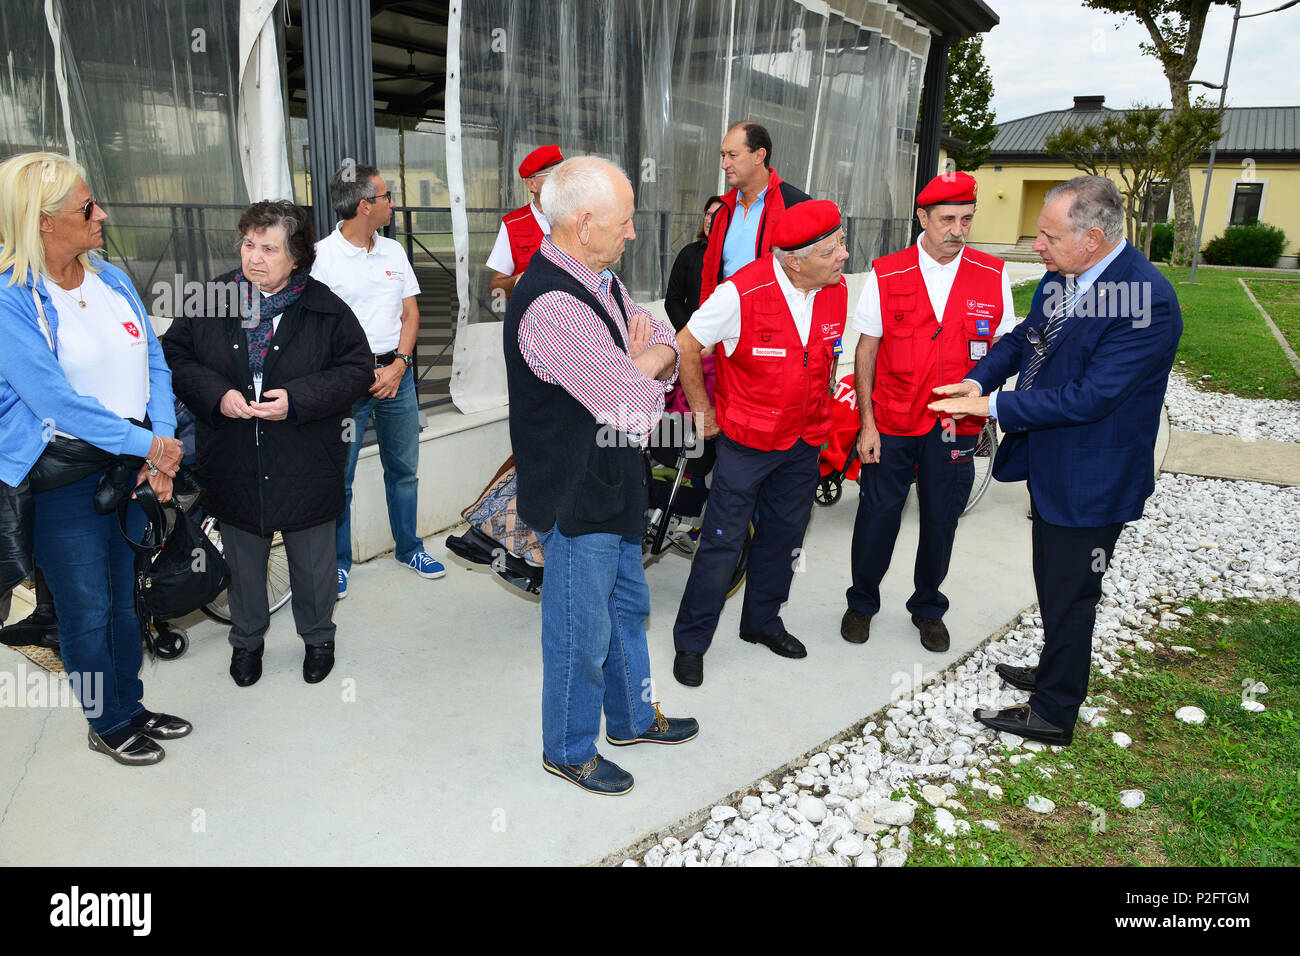 Ivano Trevisanutto, Chief Training Support Center Italy (right), discusses with Delegation of Sovereign Military Order of Malta, during the visit at caserma Ederle, 22 Sept. 2016, Vicenza, Italy. The Sovereign Military Order of Malta (SMOM) or Order of Malta, is a Roman Catholic  Religious Order traditionally of military, chivalrous and noble nature for defense of Catholic faith and assistance to the poor. (U.S. Army photo by Visual Information Specialist Paolo Bovo/Released) Stock Photo